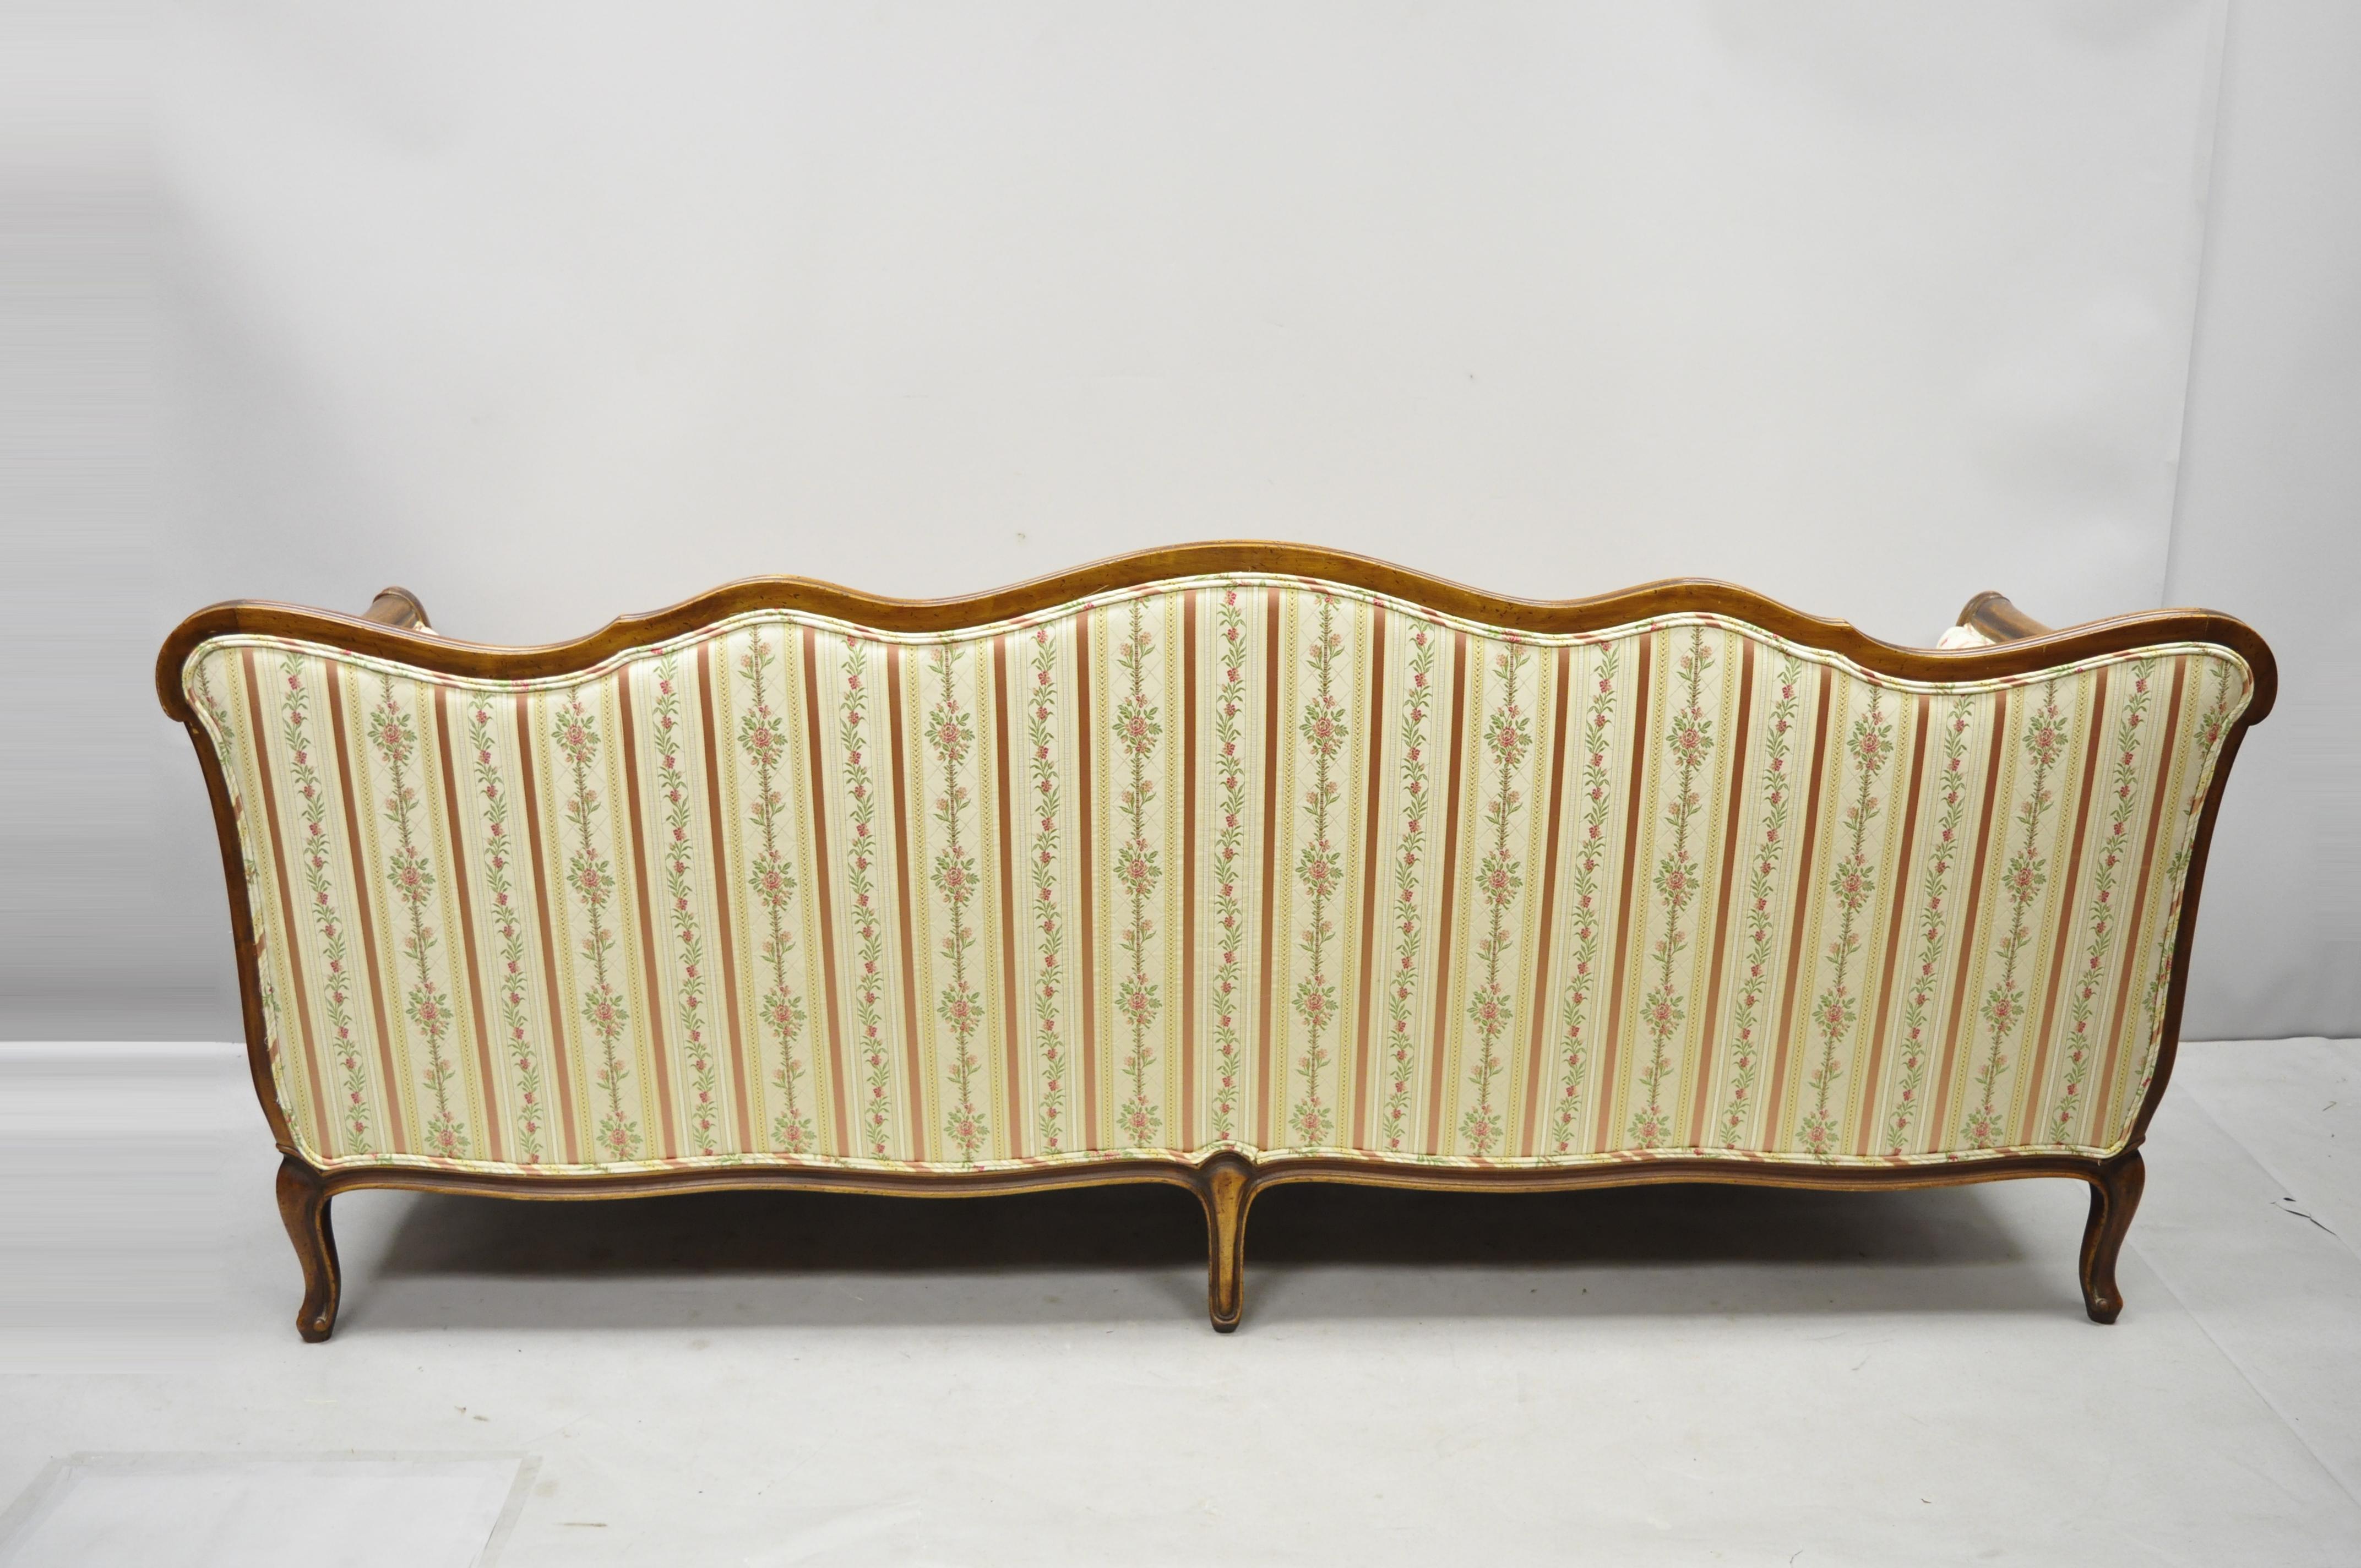 French Louis XV Provincial Style Sofa with Serpentine Carved Back 1